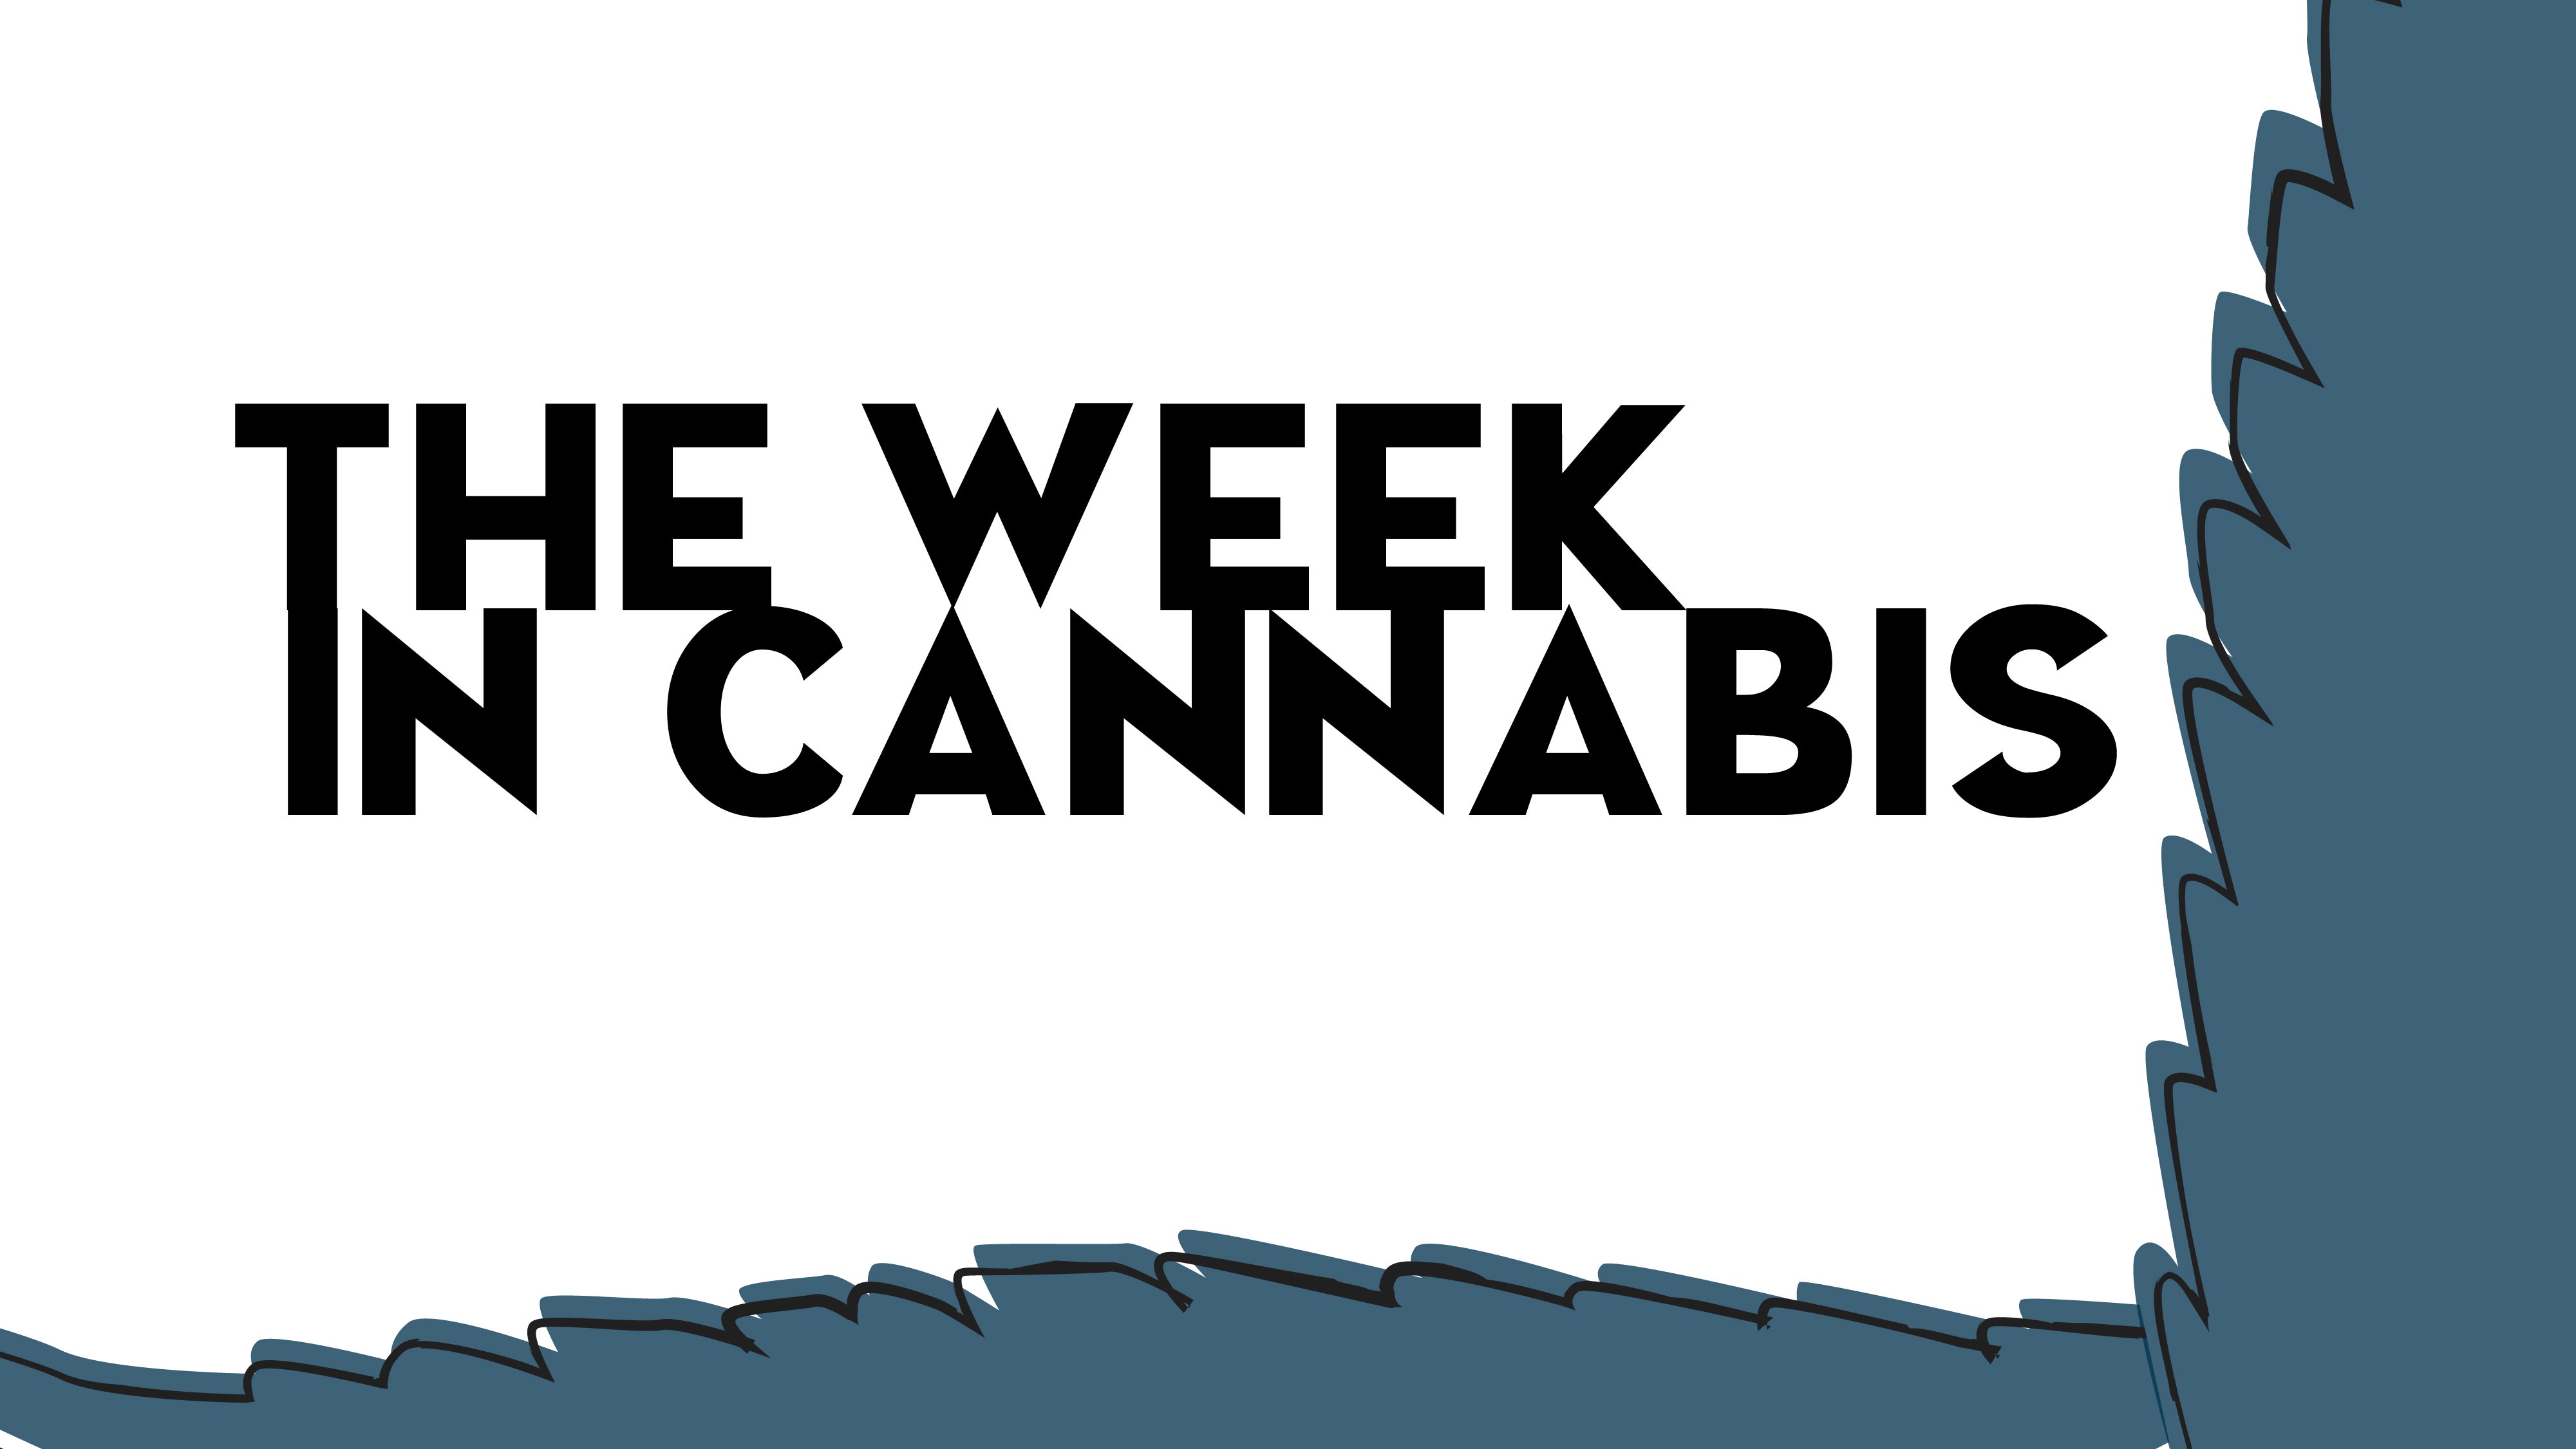 The Week In Cannabis: Cannabis For Veterans, Canopy, Tilray, SMG, Big Earnings, Financings And More